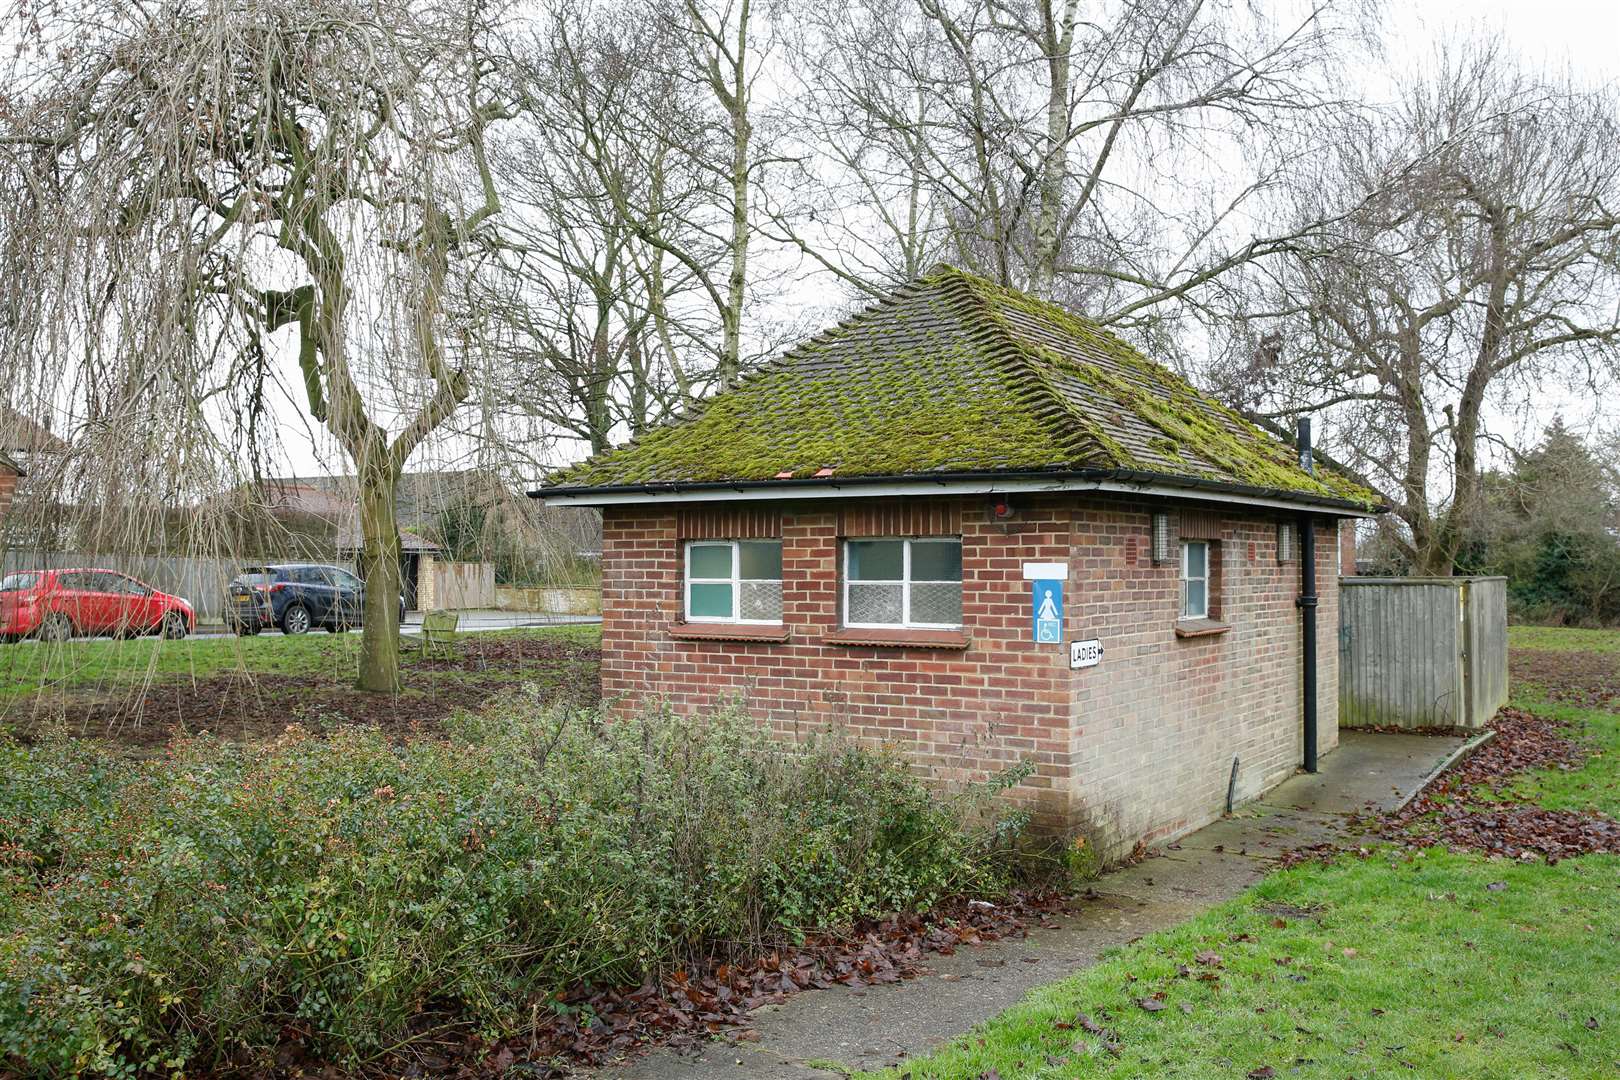 Toilets at Meopham Green